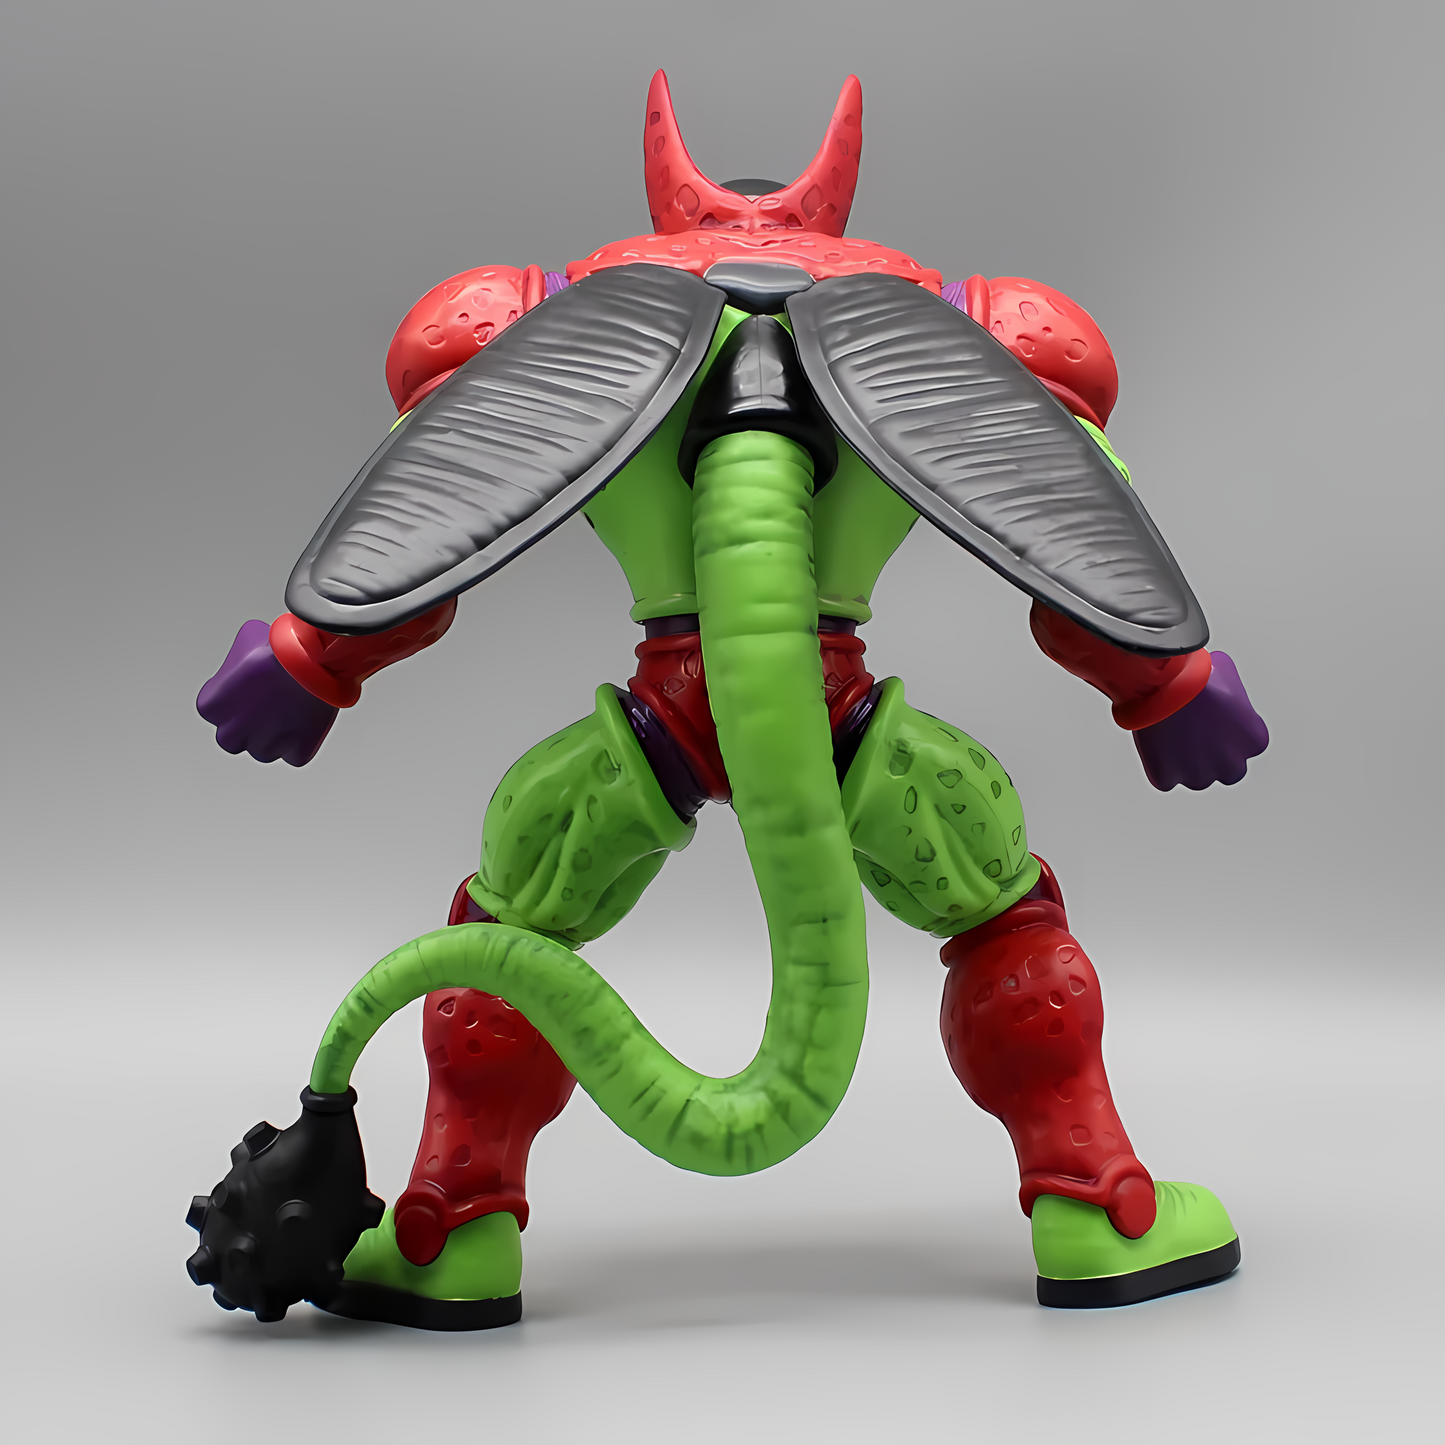 Back perspective of the Dragon Ball 'Cell Max' collectible figure, highlighting the character's unique spotted green skin and intricate red wings.